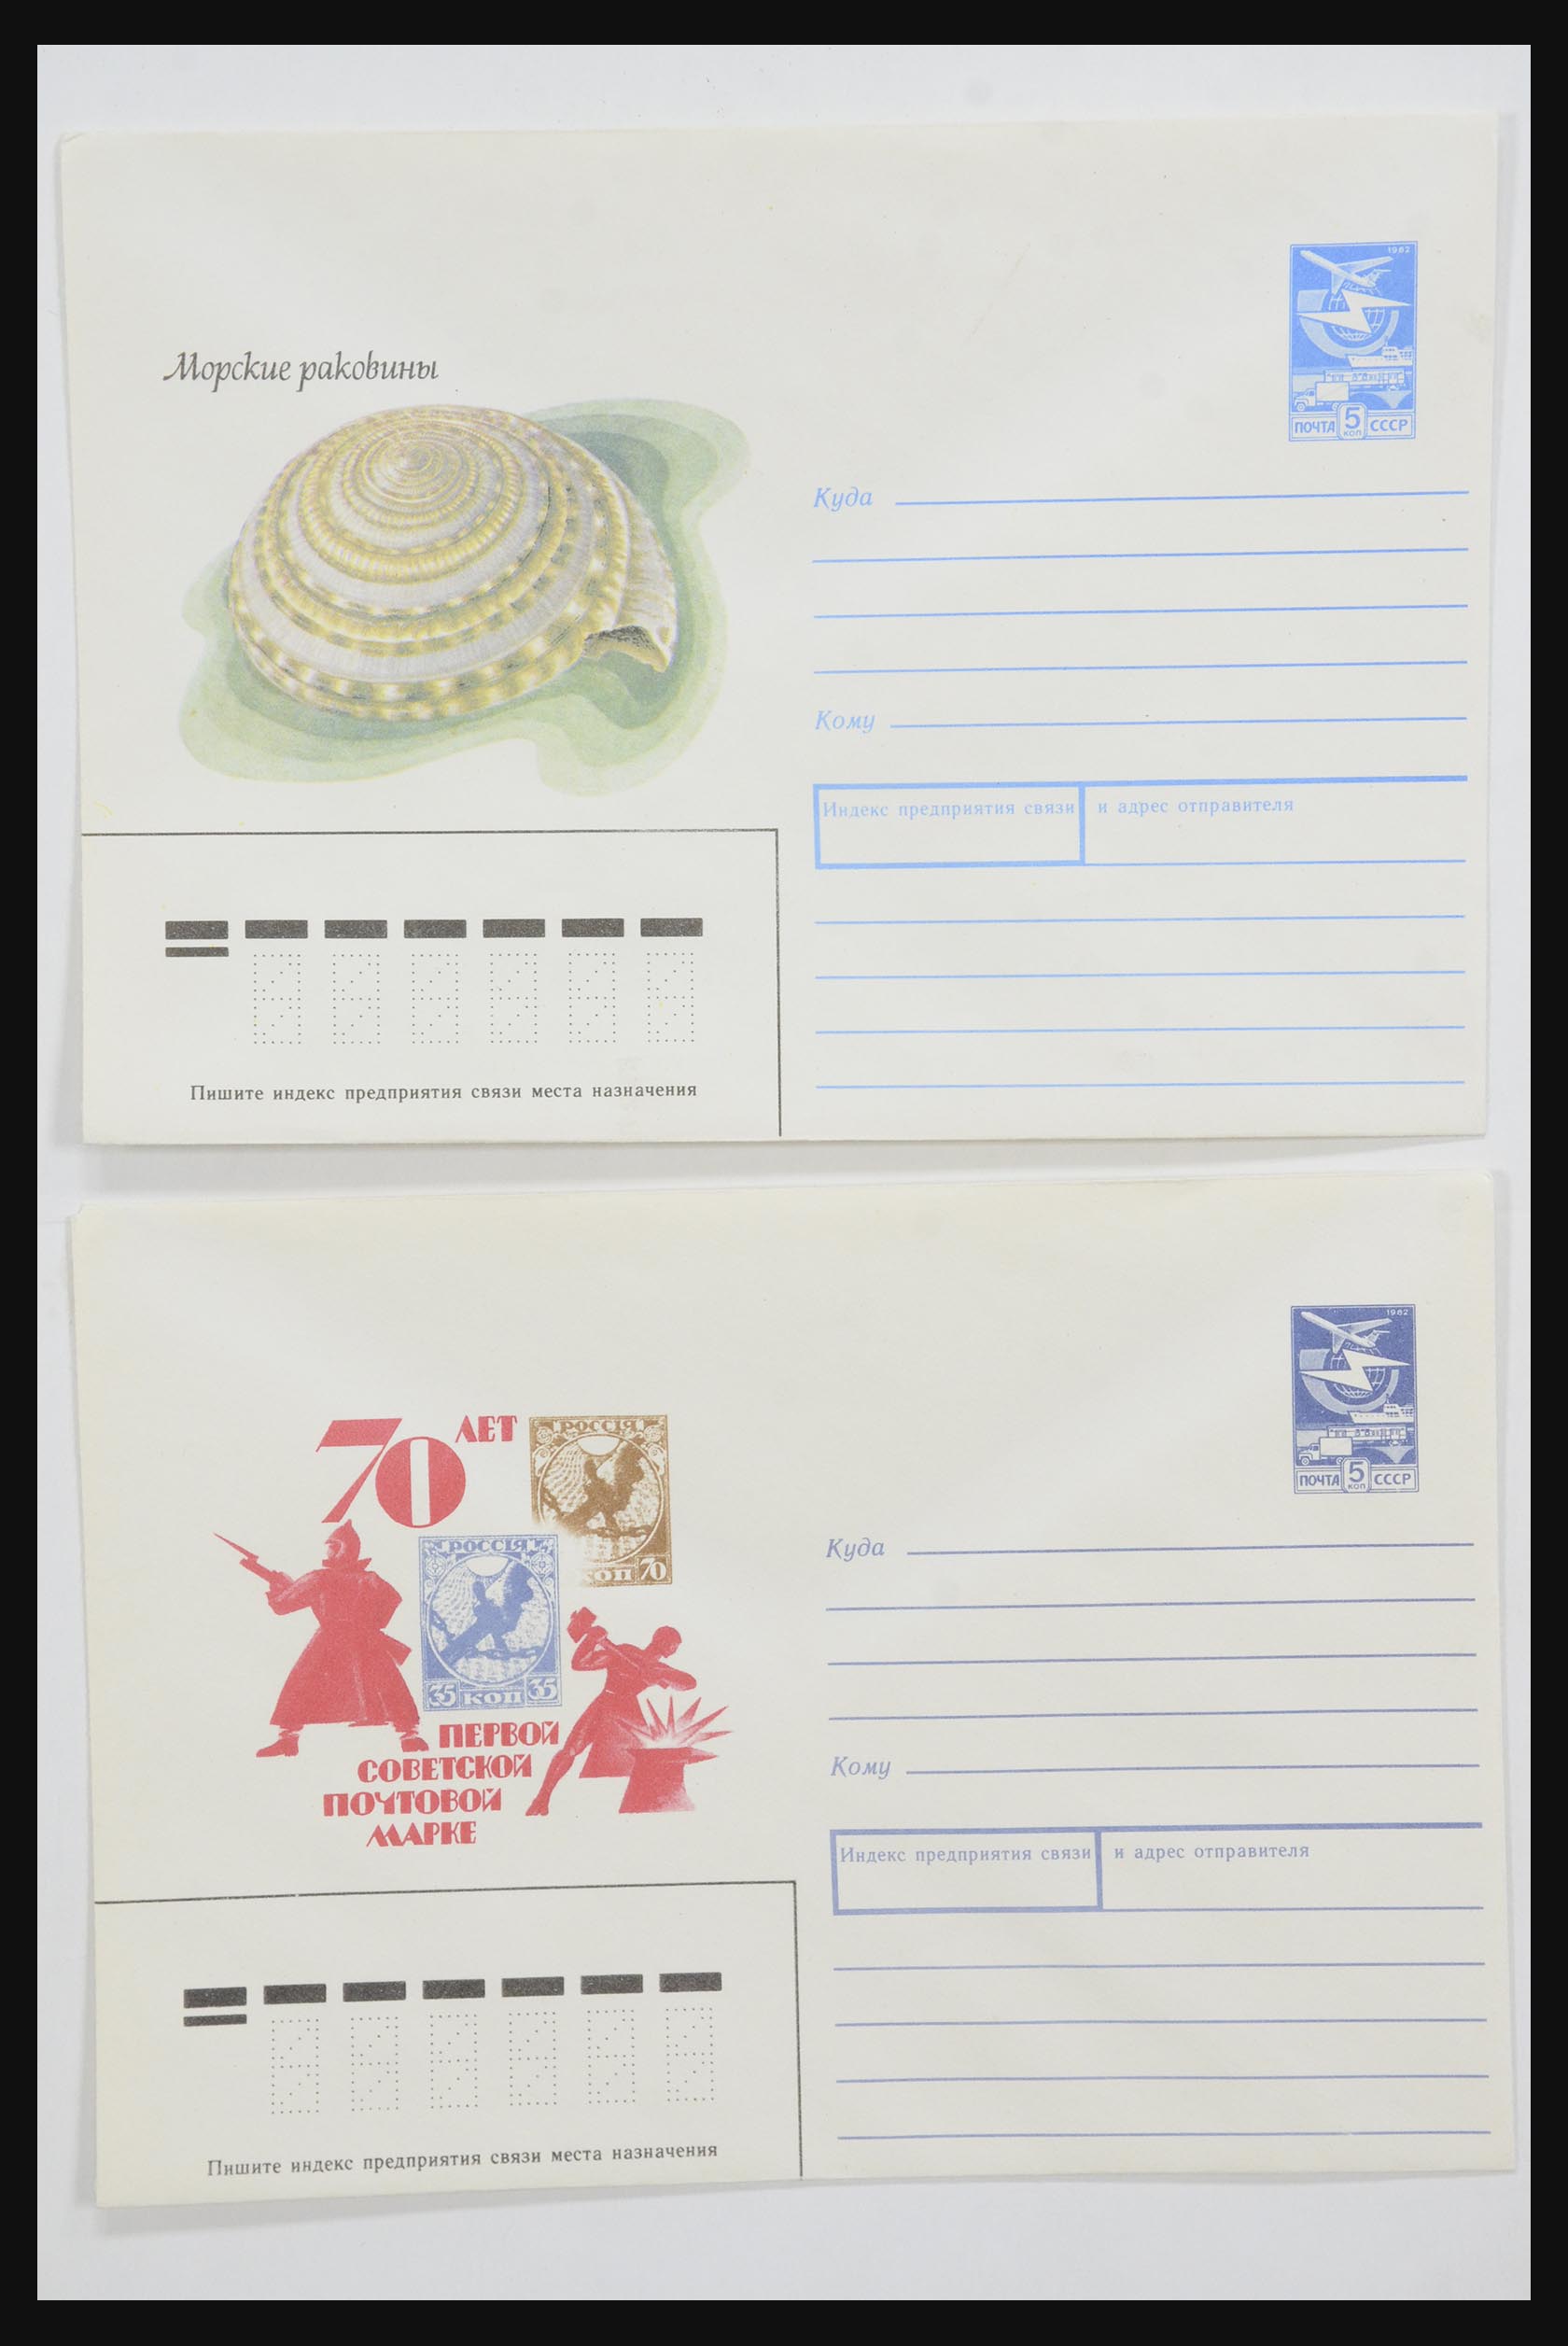 31928 0060 - 31928 Eastern Europe covers 1960's-1990's.